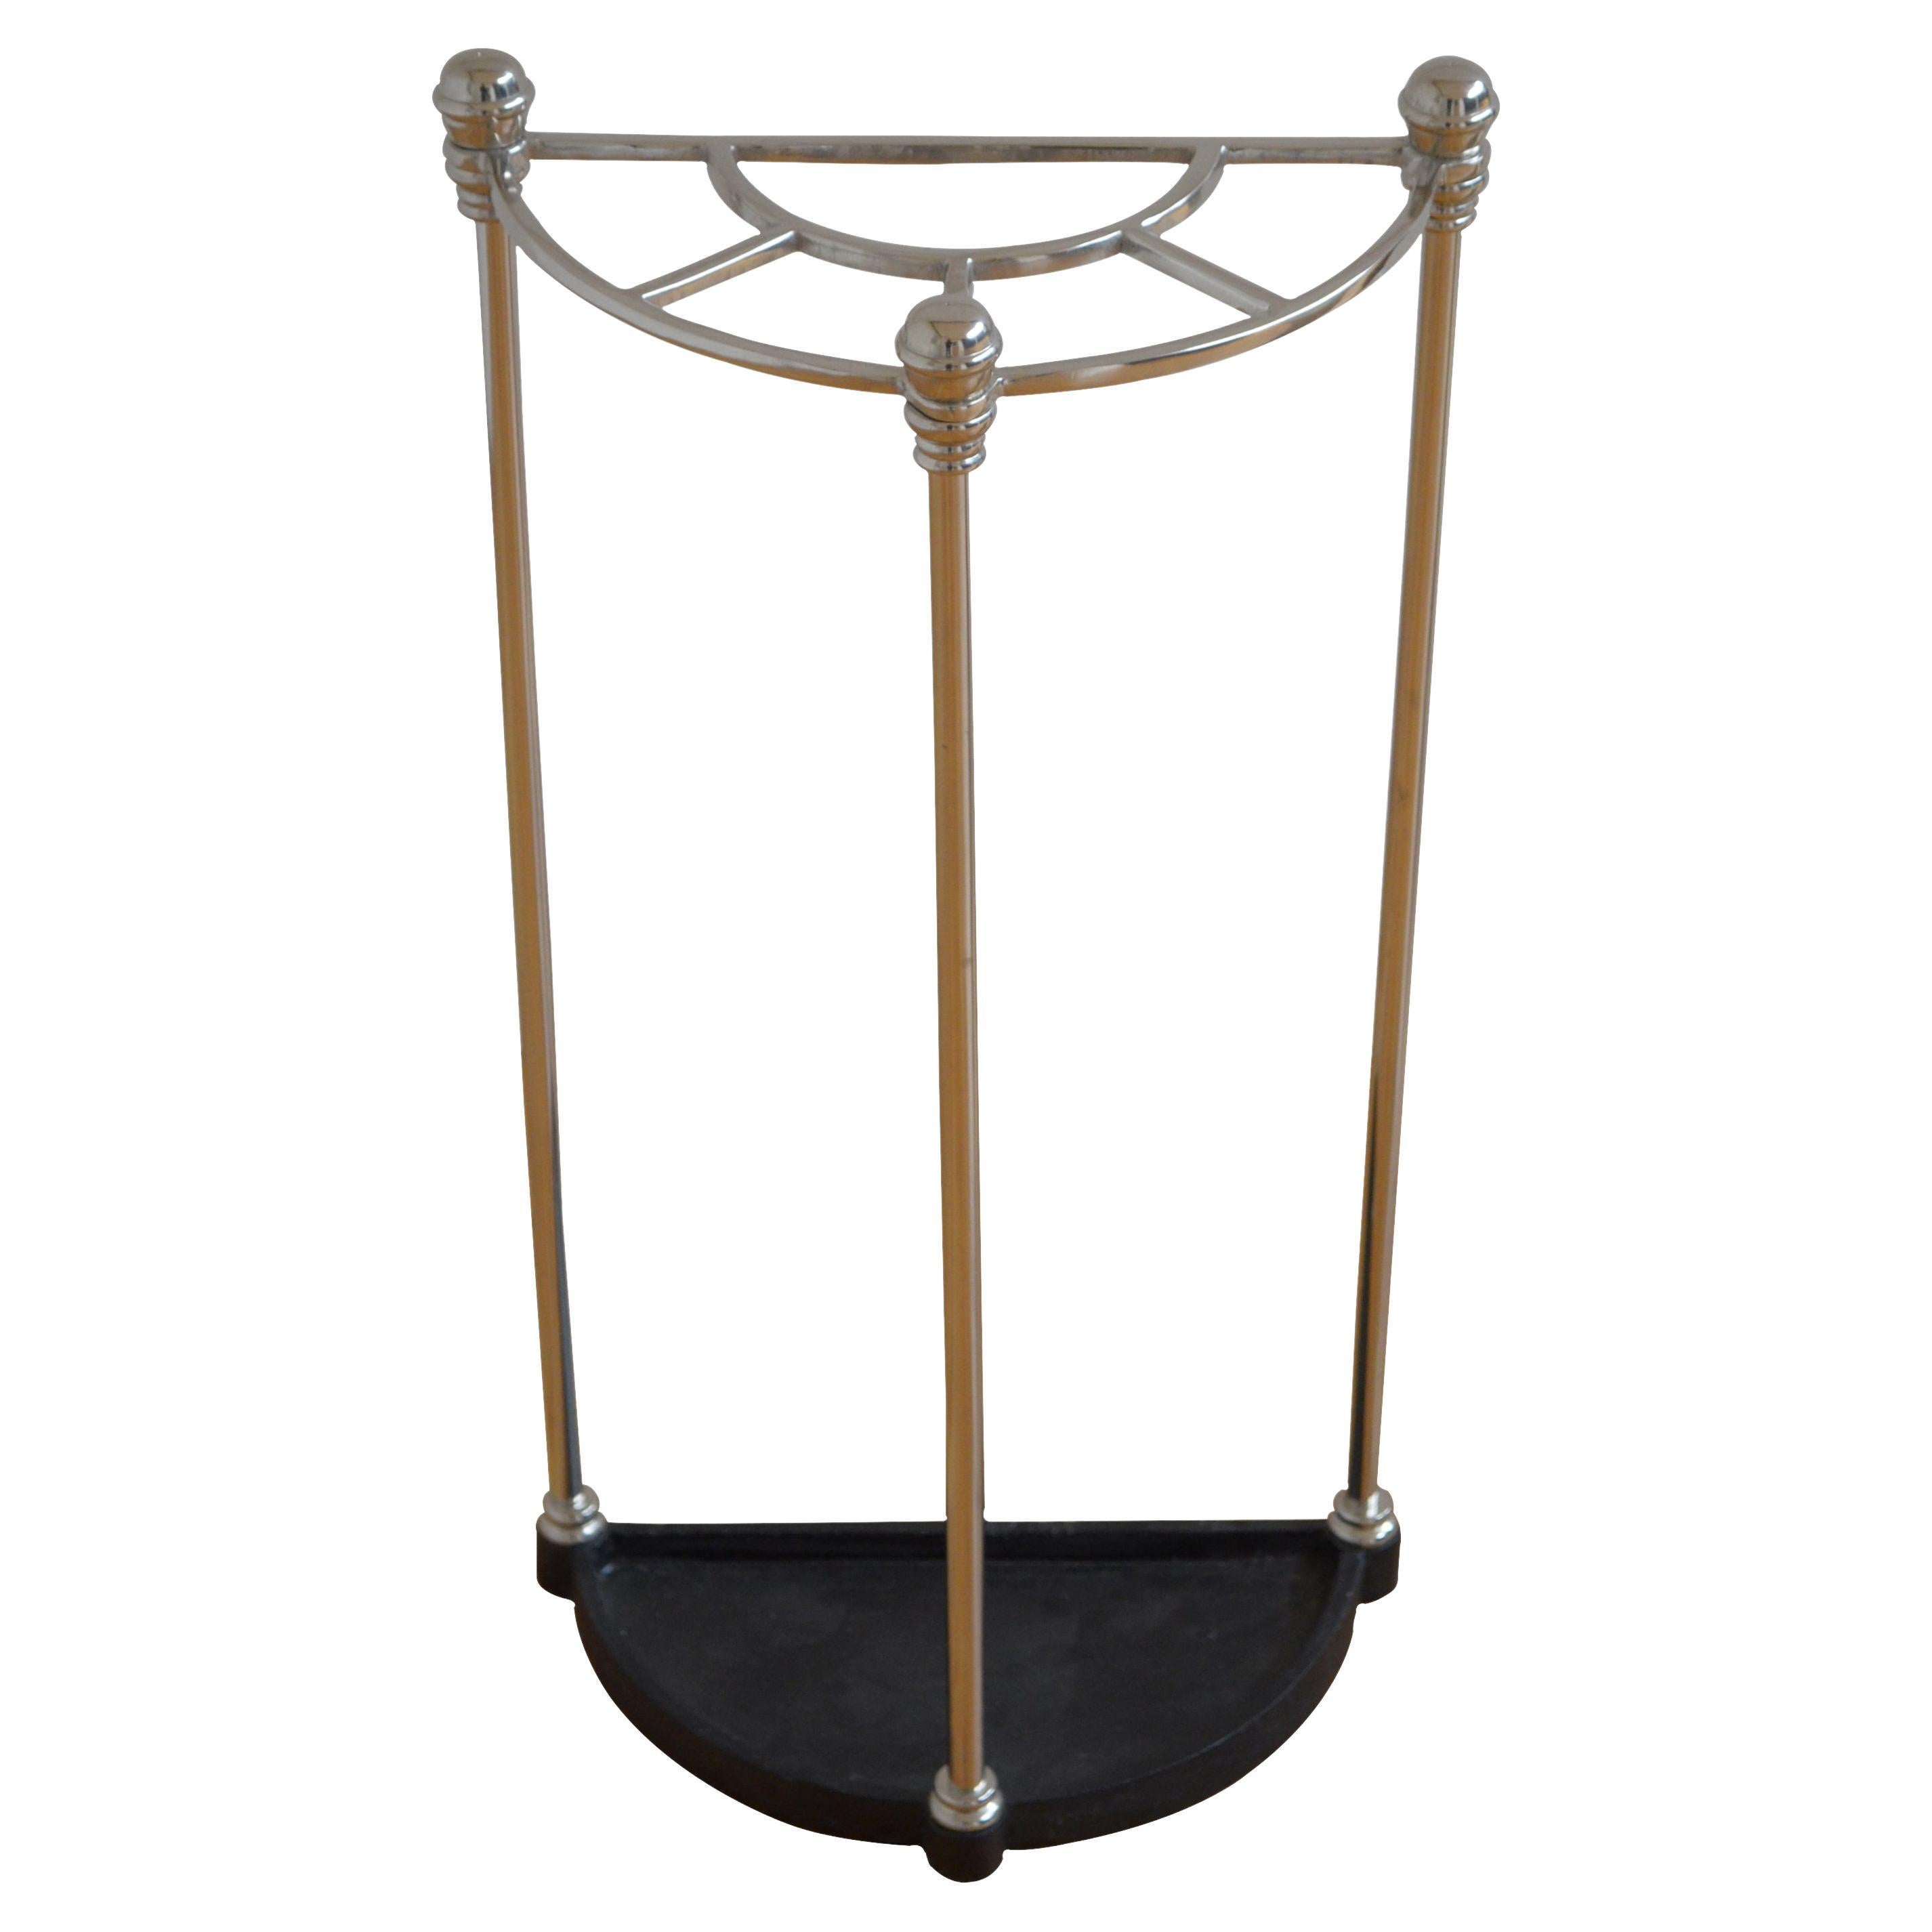 Art Deco Stainless Steel Umbrella Stand For Sale